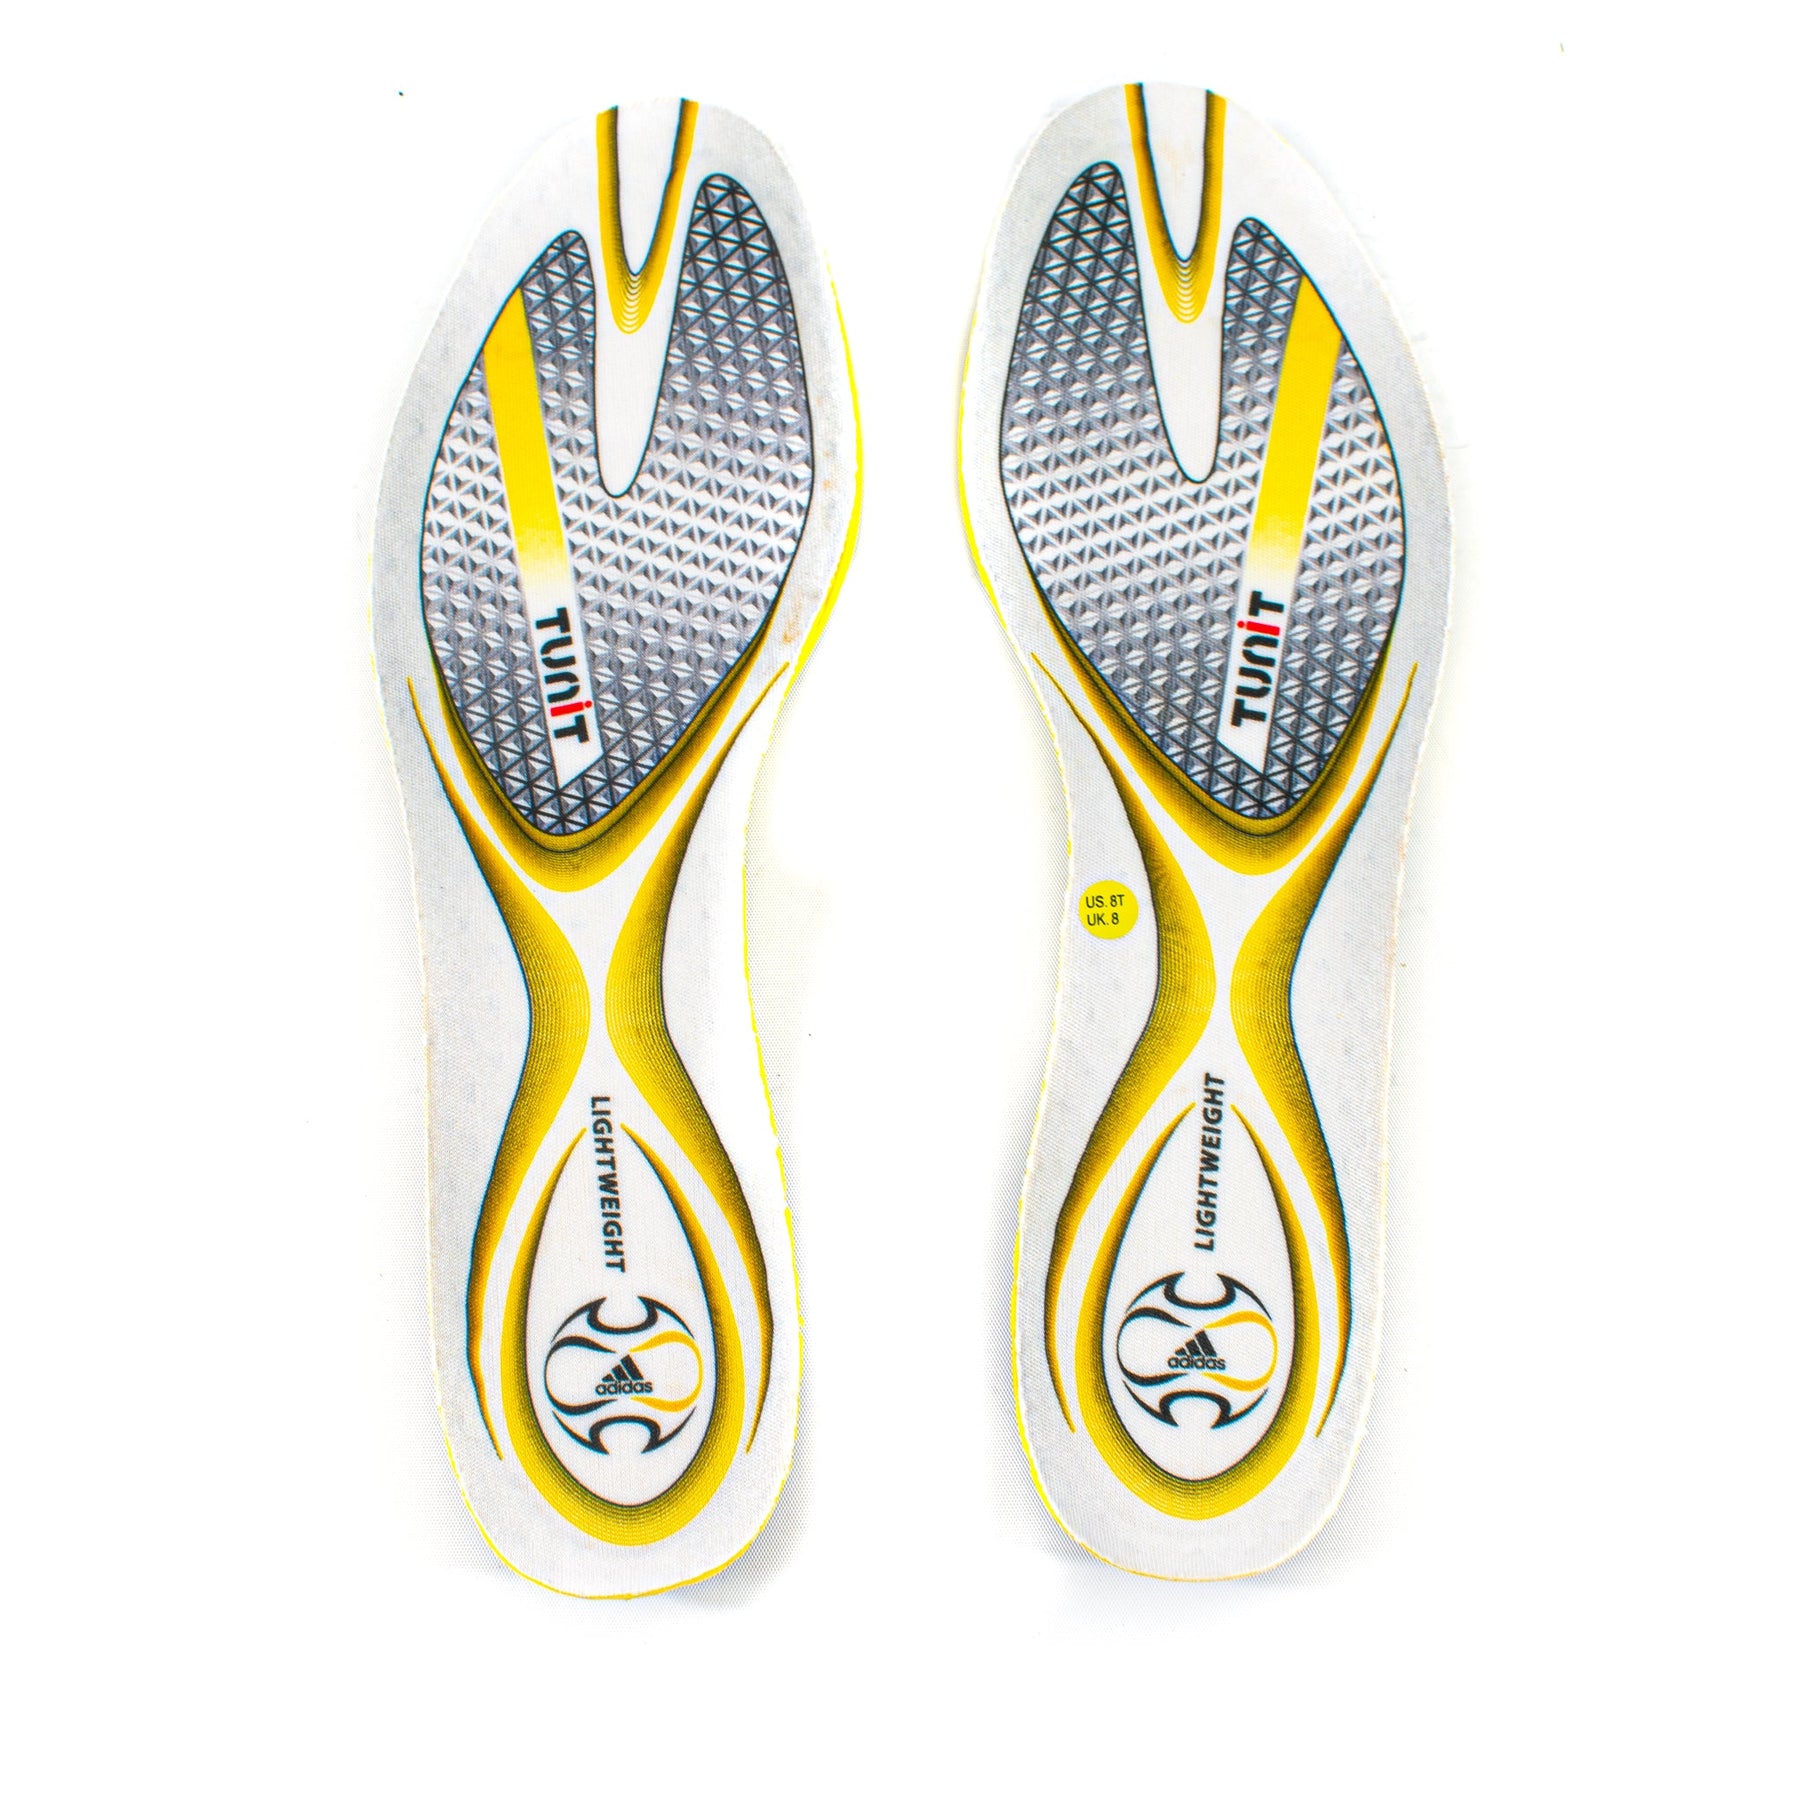 Adidas Lightweight Insole – Classic Soccer Cleats